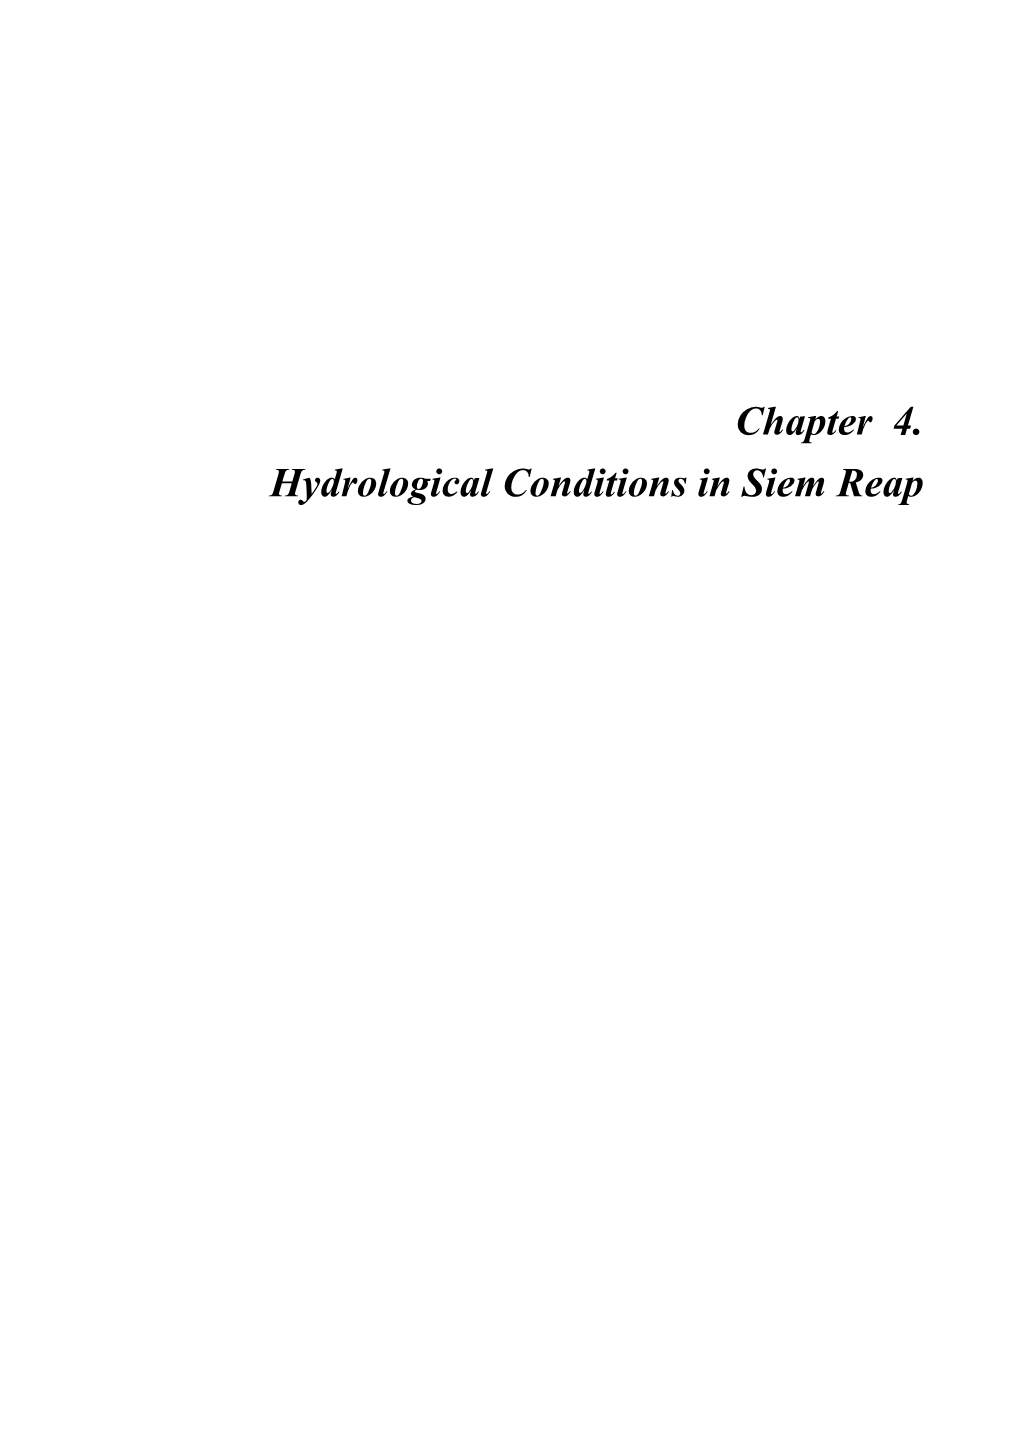 Chapter 4. Hydrological Conditions in Siem Reap